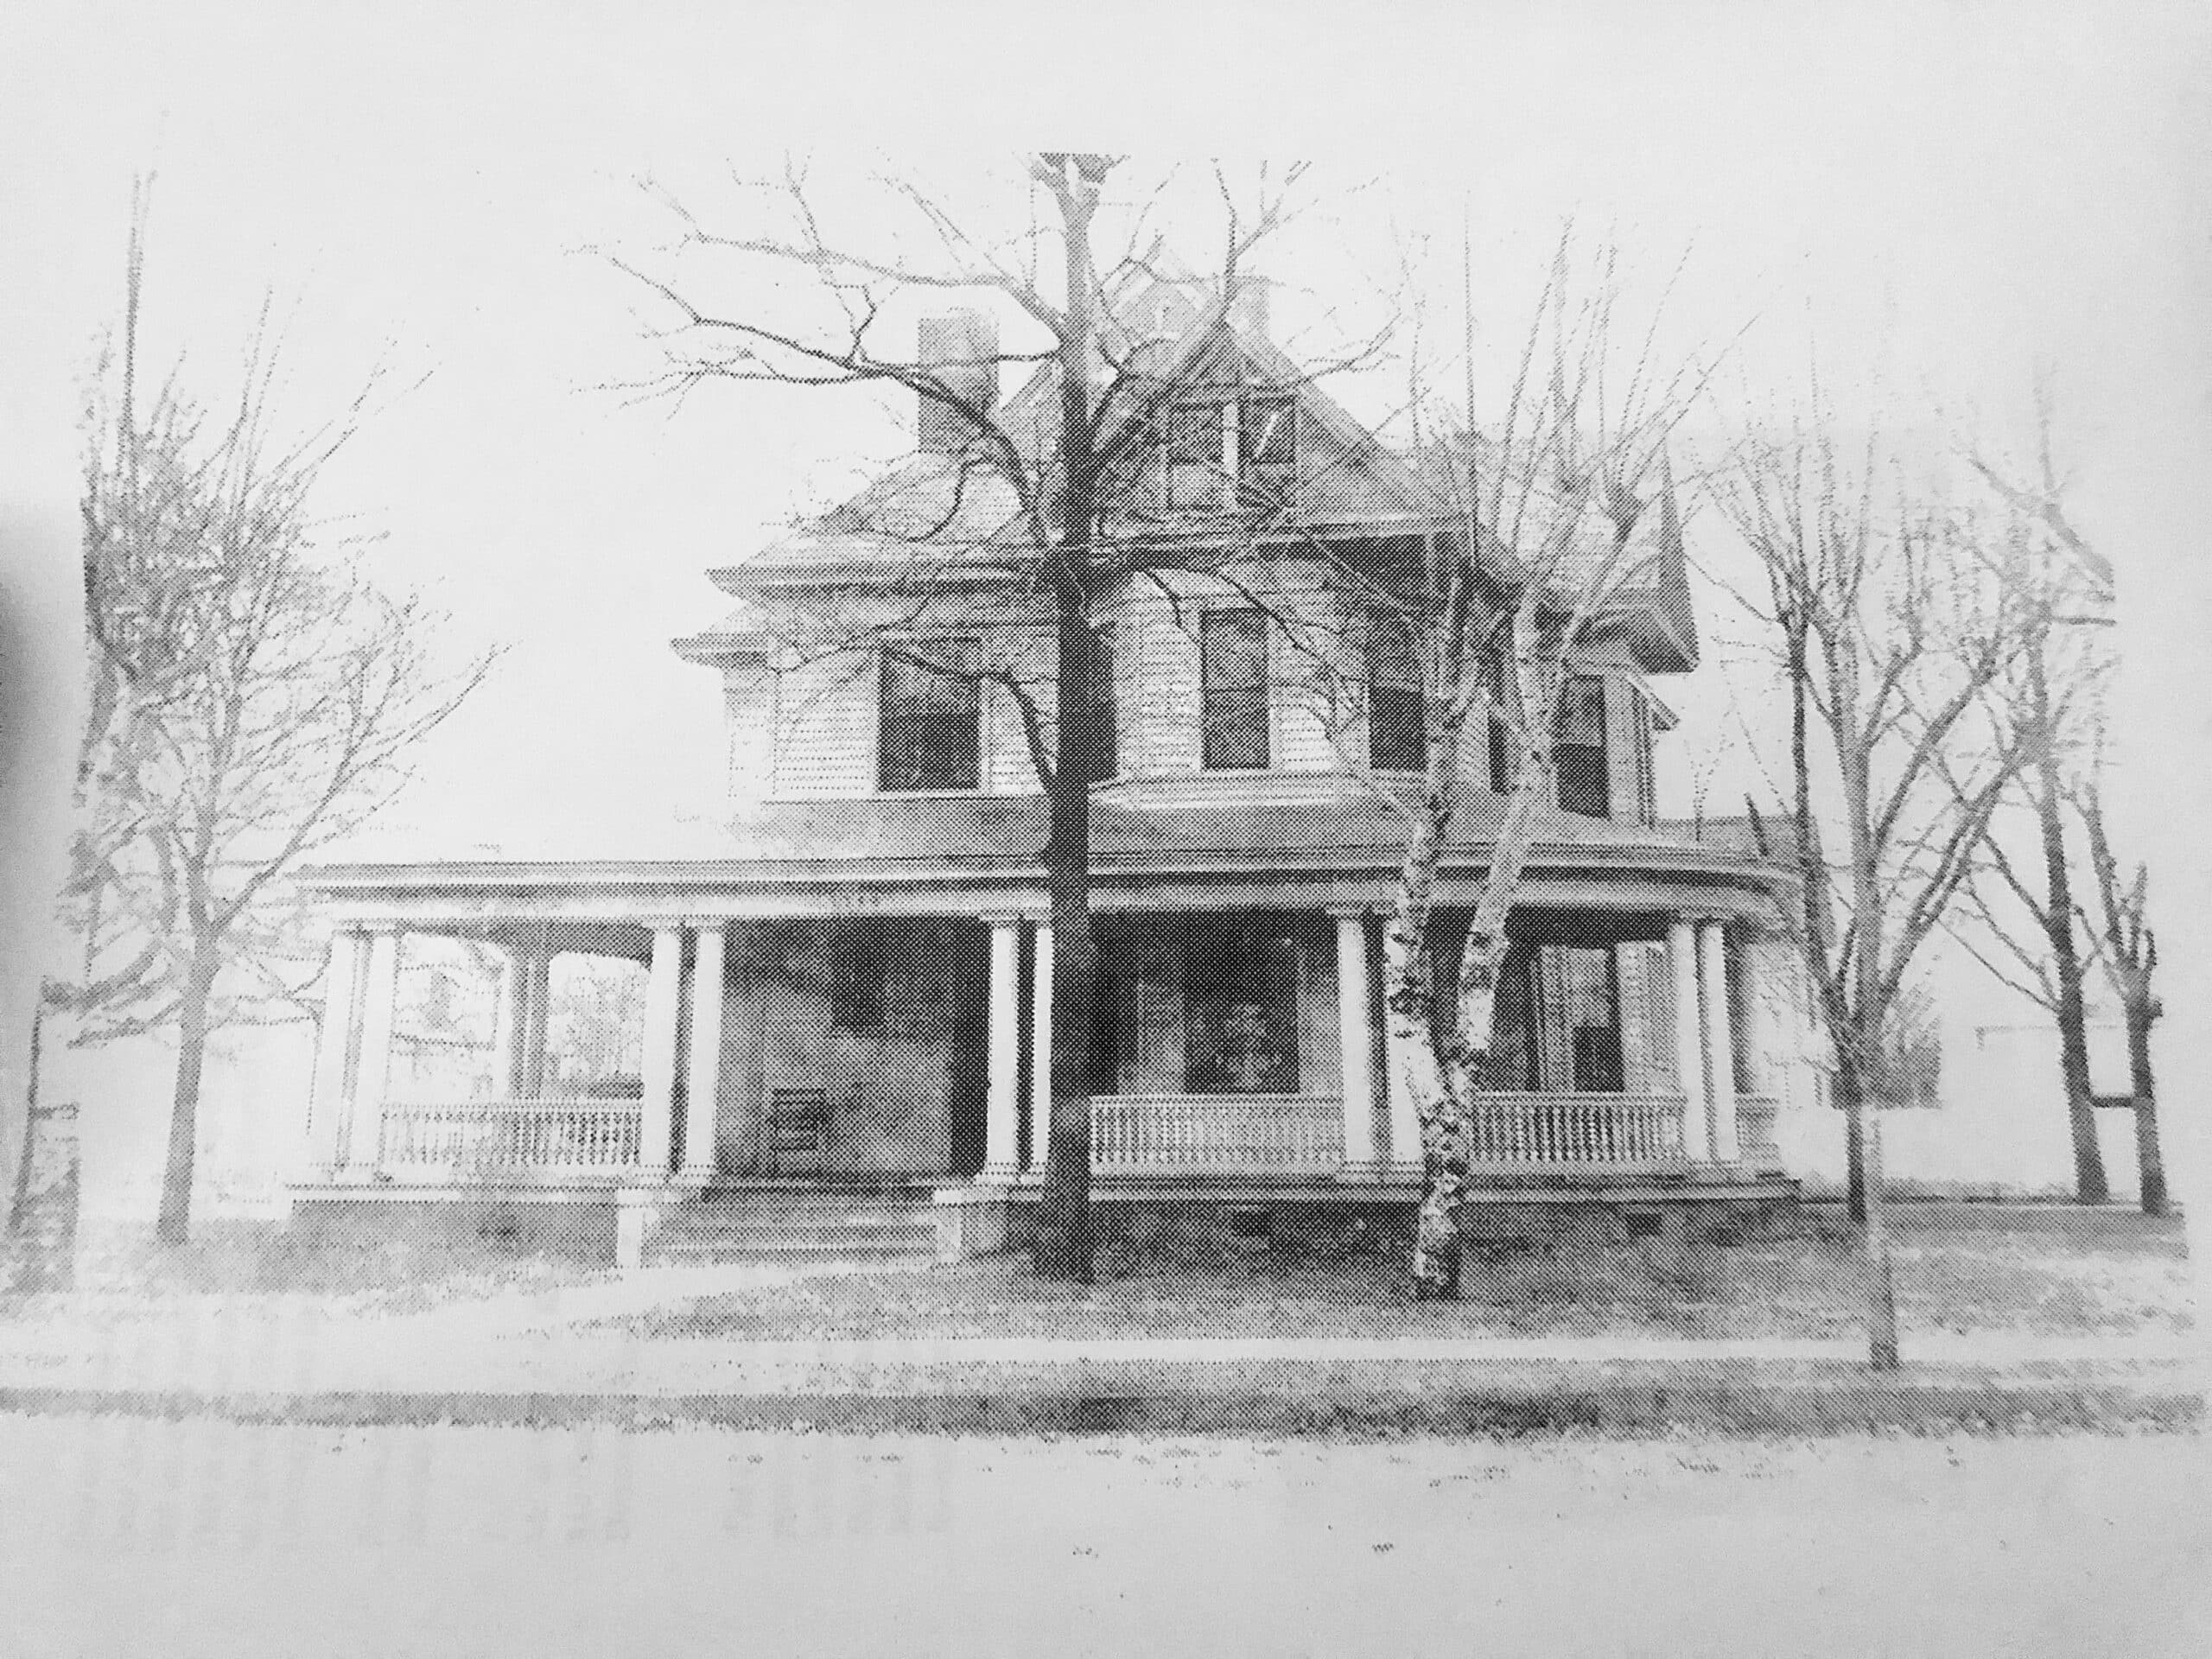 Taber-Patterson House